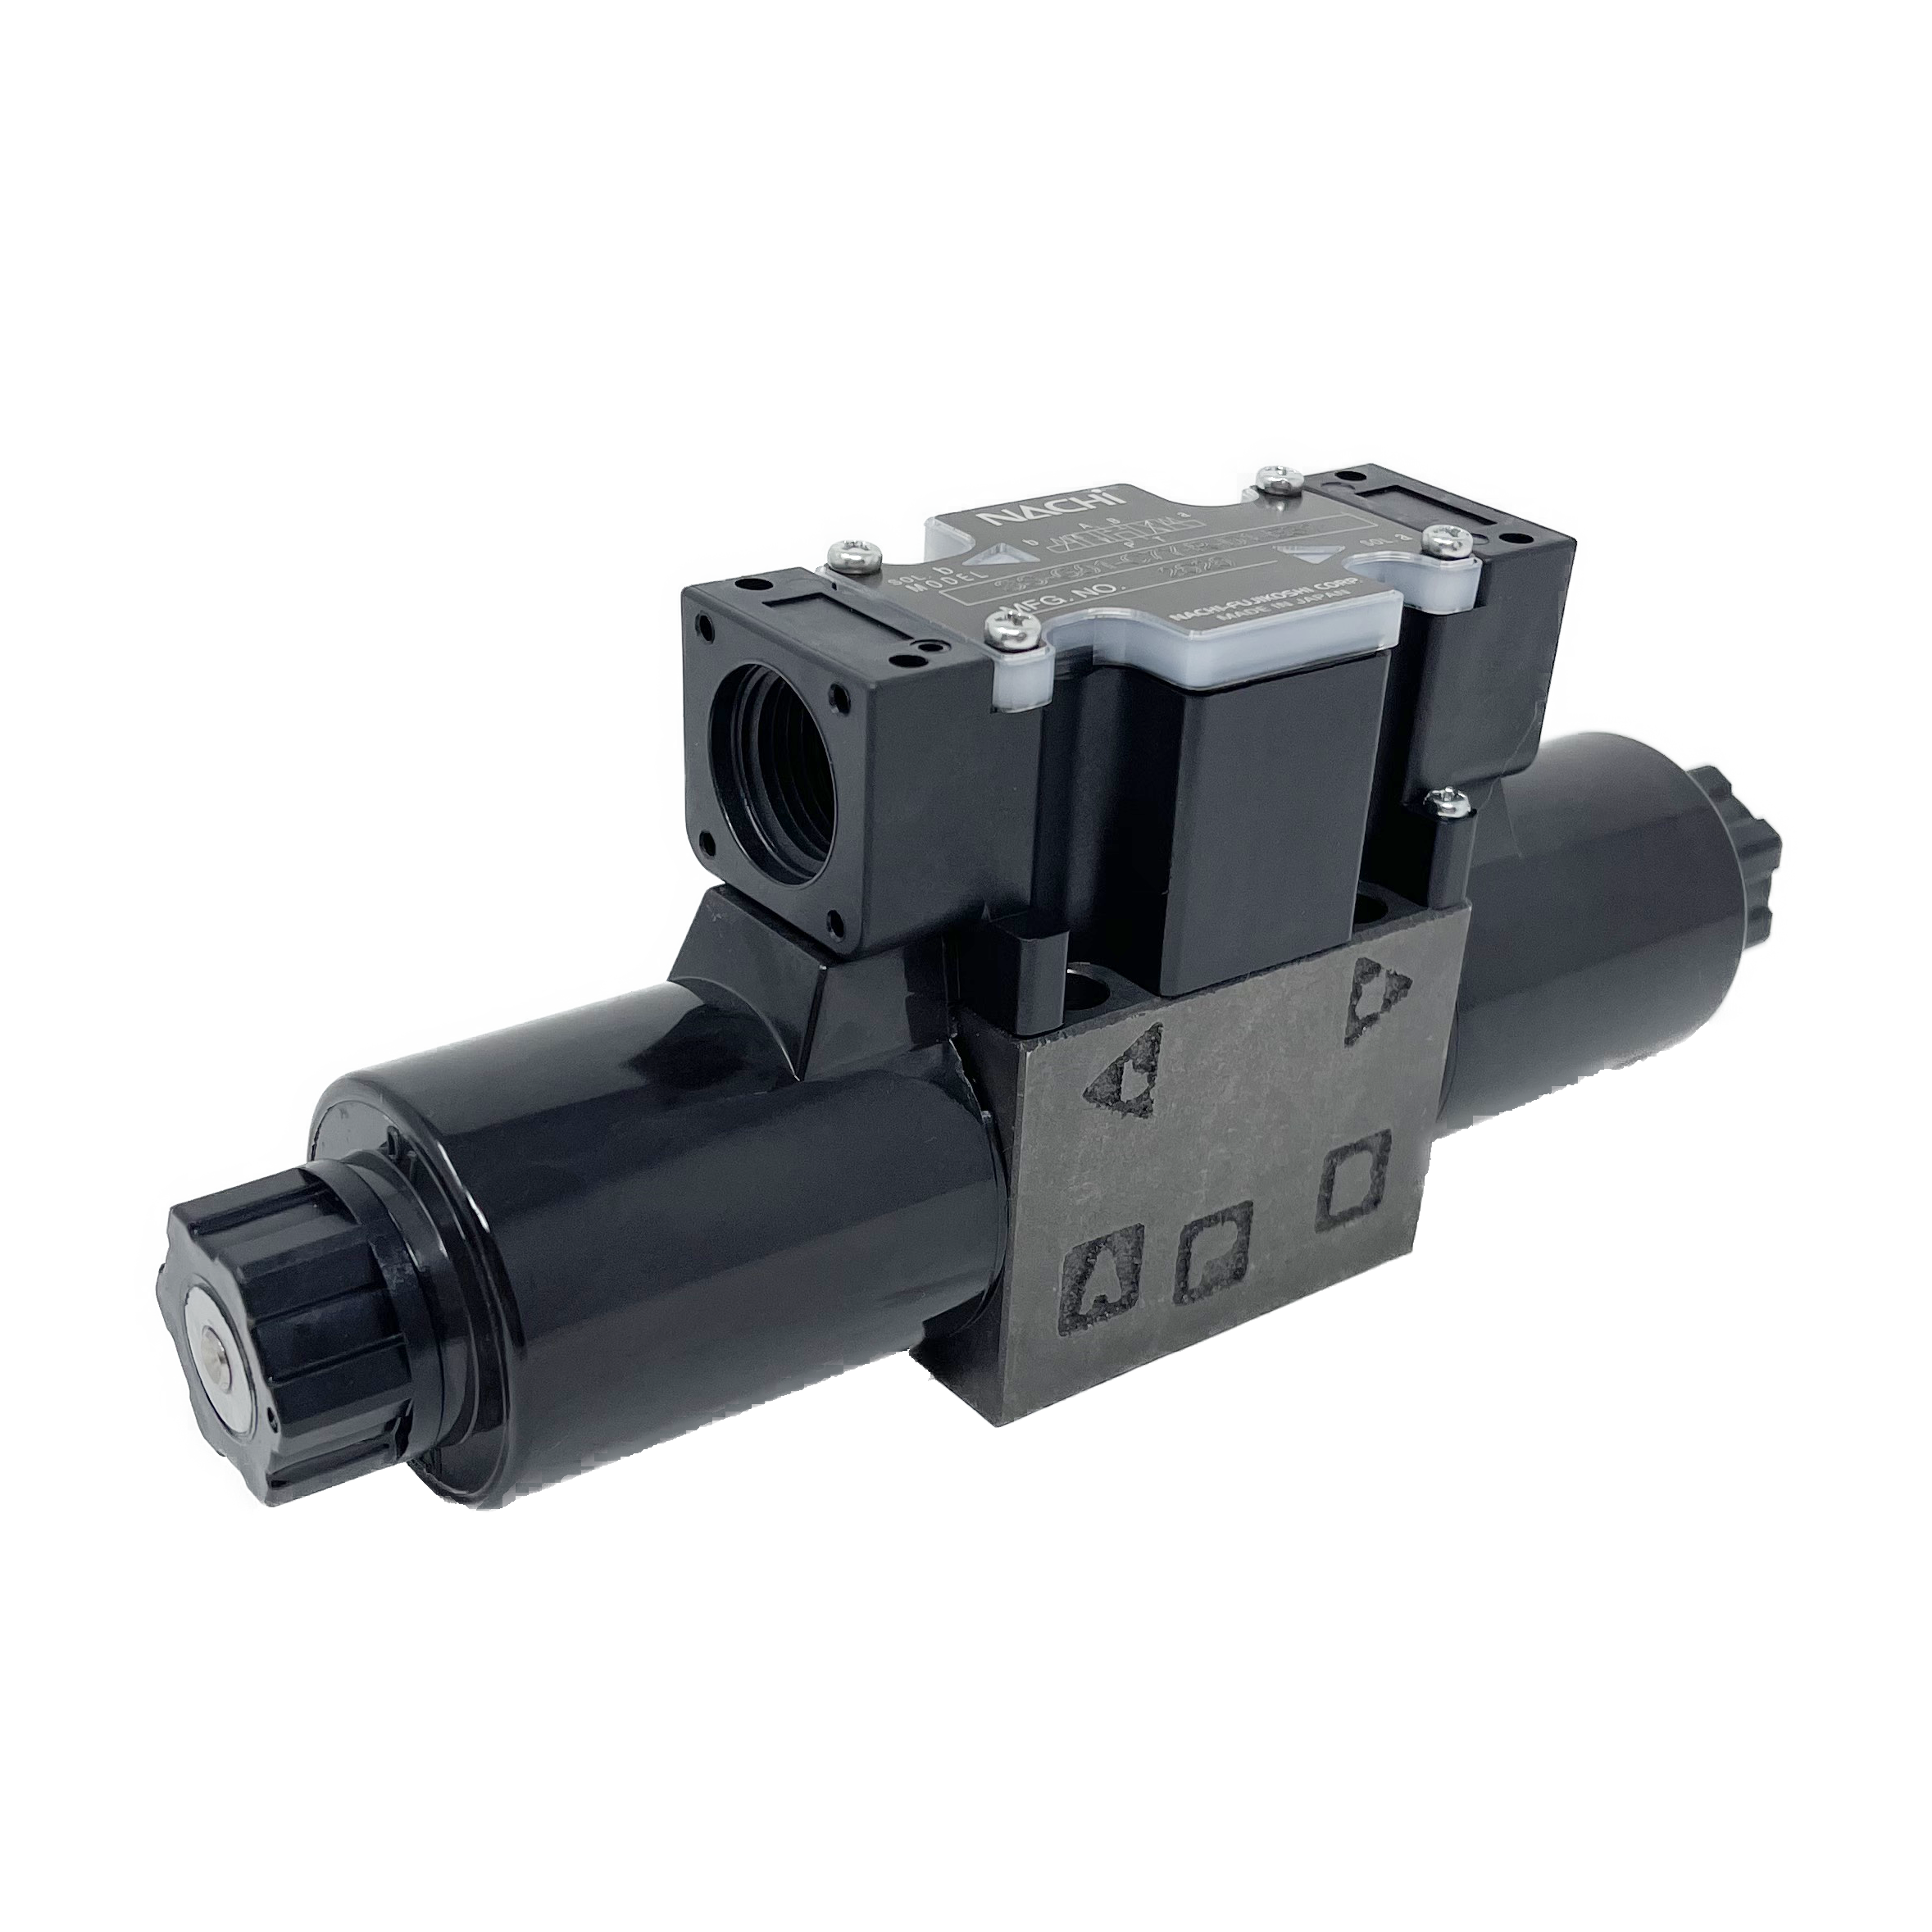 SS-G01-C6-FR-D1-E31 : Nachi Solenoid Valve, 3P4W, D03 (NG6), 21.1GPM, 5075psi, Motor Spool, 12 VDC, Wiring Box with Lights, Shockless Type